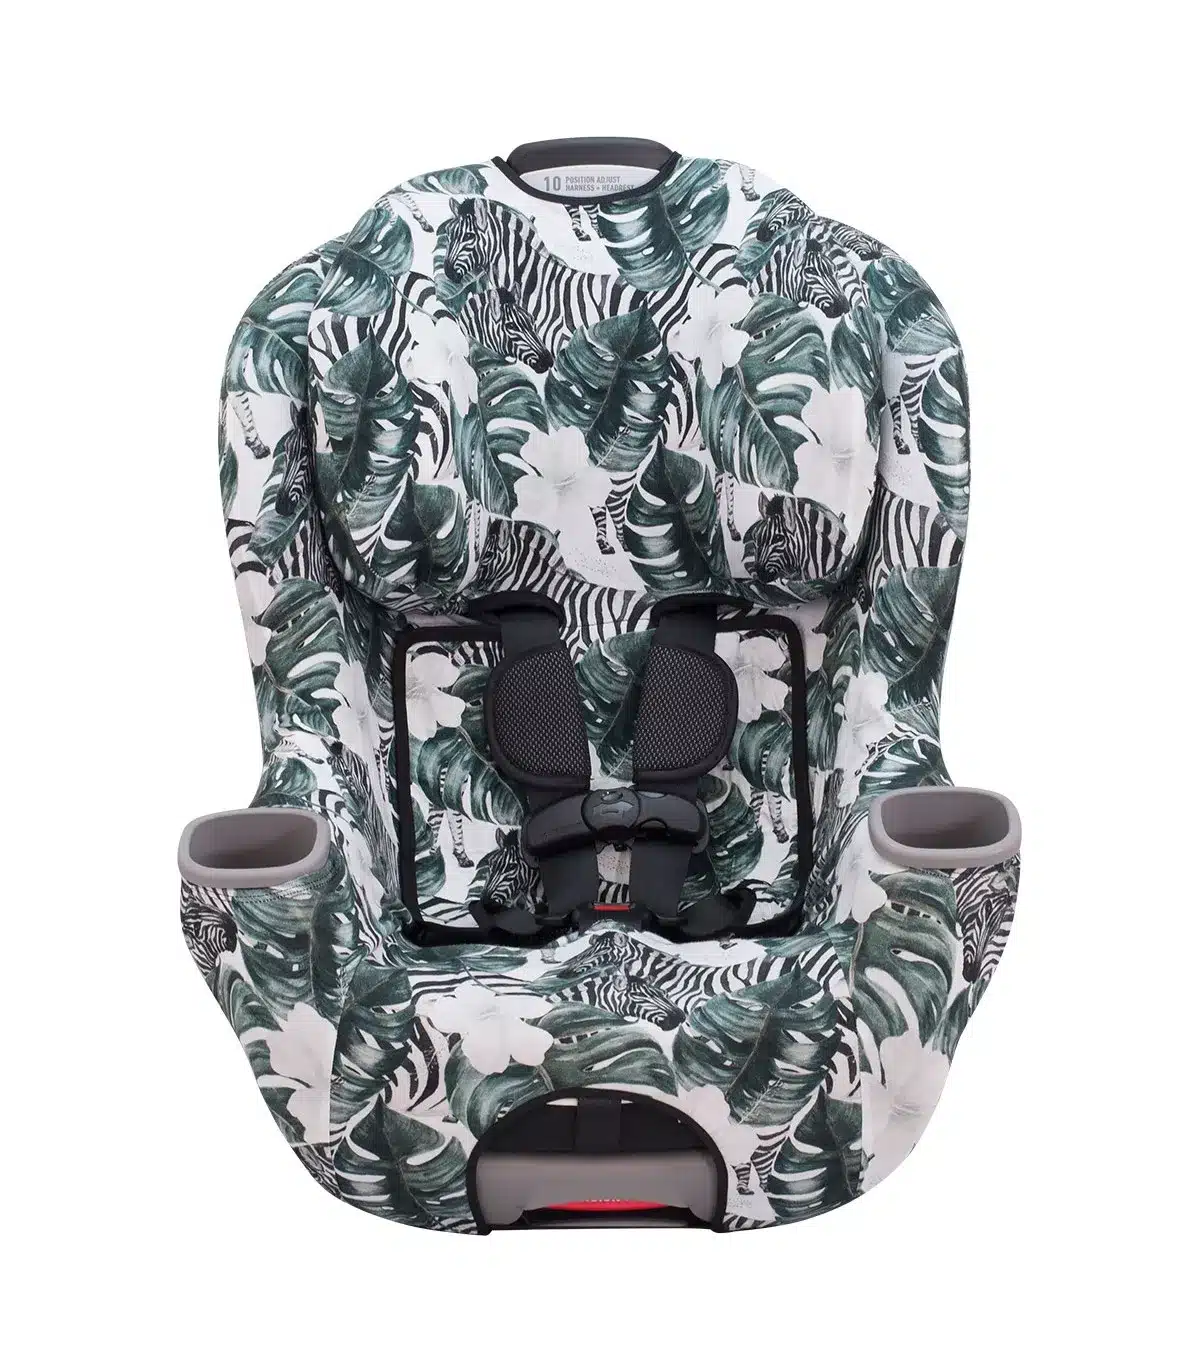 How To Wash Graco Car Seat Cover